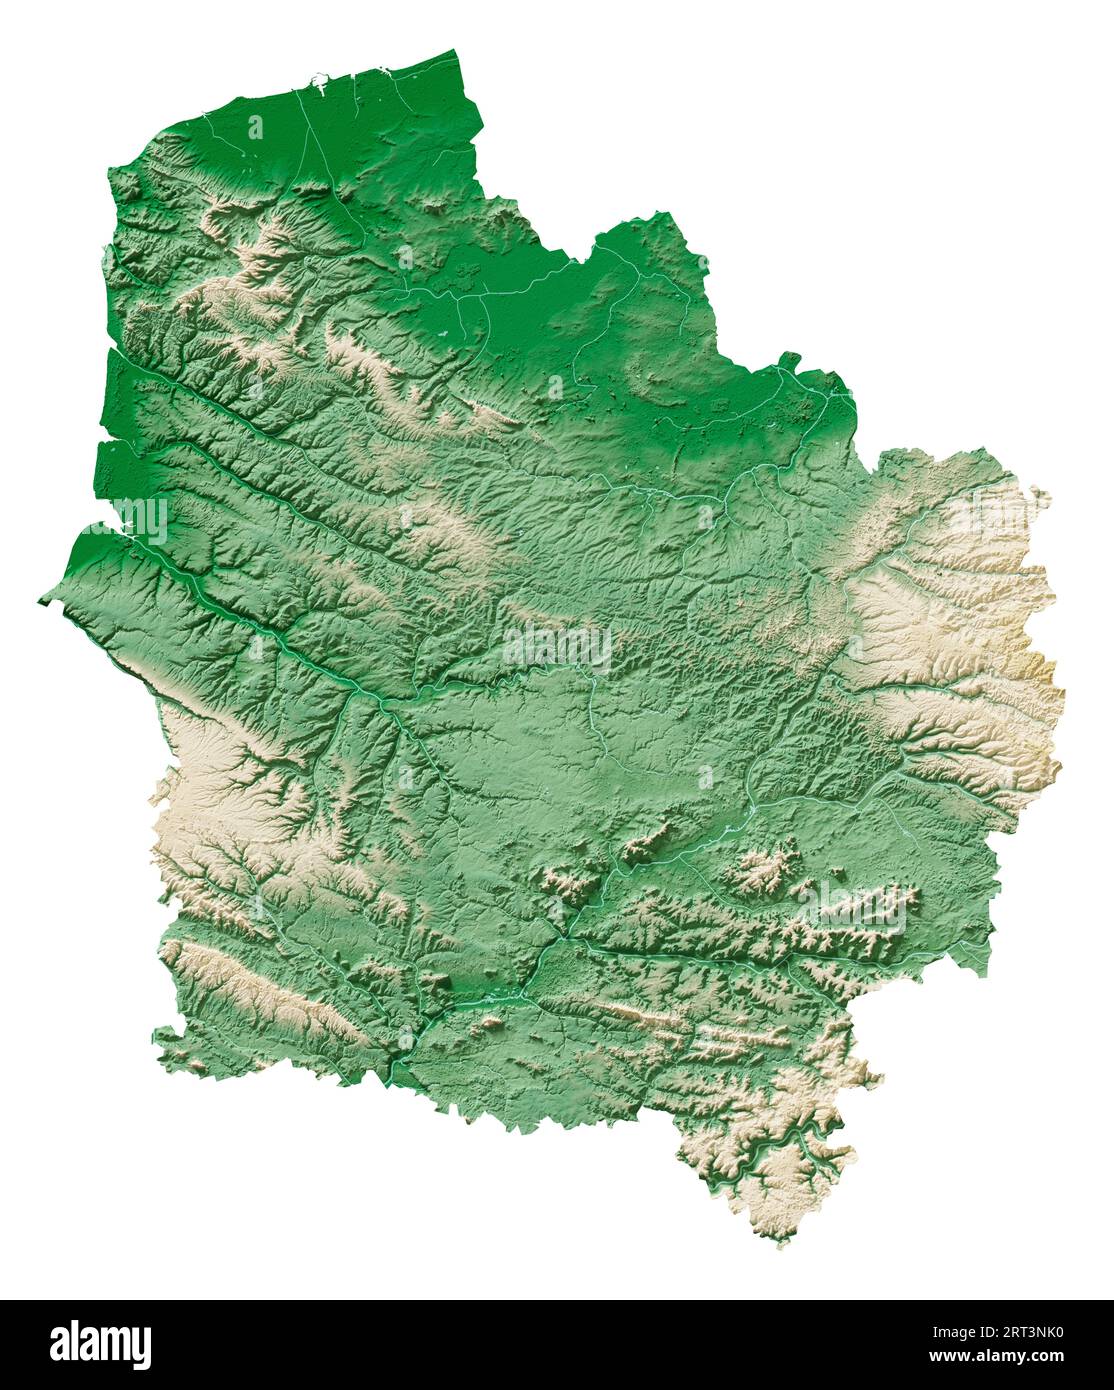 Hauts-de-France. A region of France. Detailed 3D rendering of a shaded relief map, rivers, lakes. Colored by elevation. Pure white background. Stock Photo